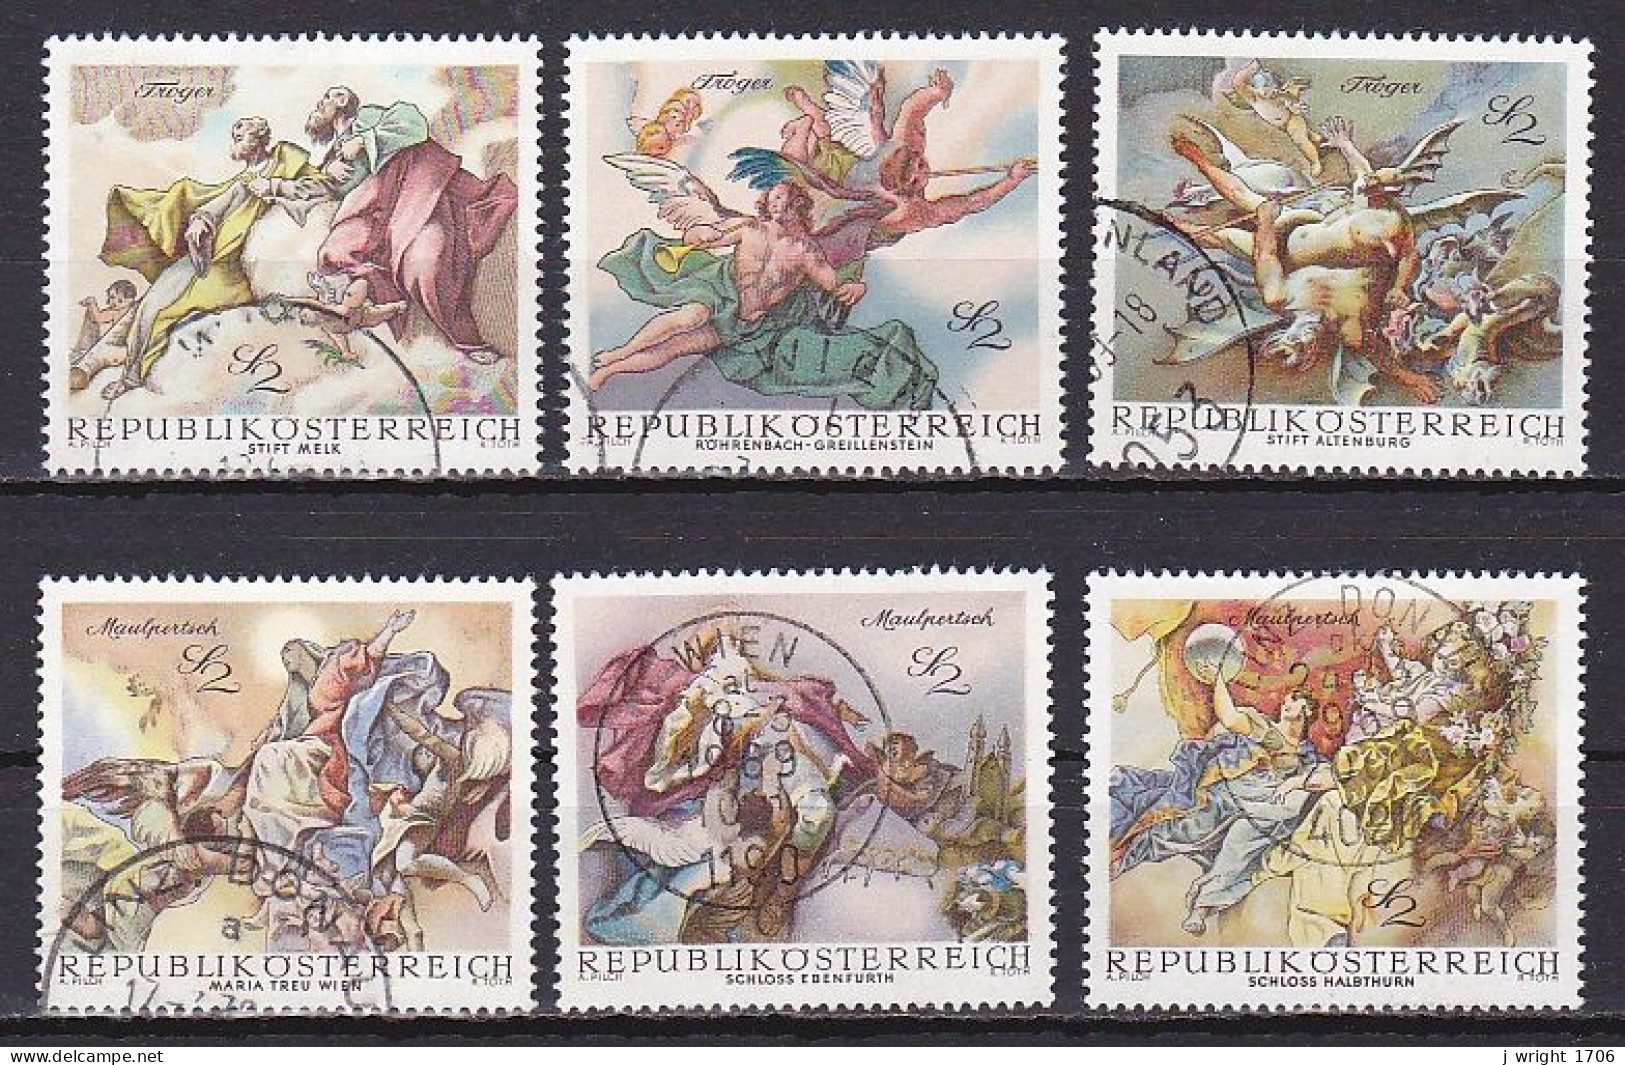 Austria, 1968, Baroque Frescoes, Set, USED - Used Stamps